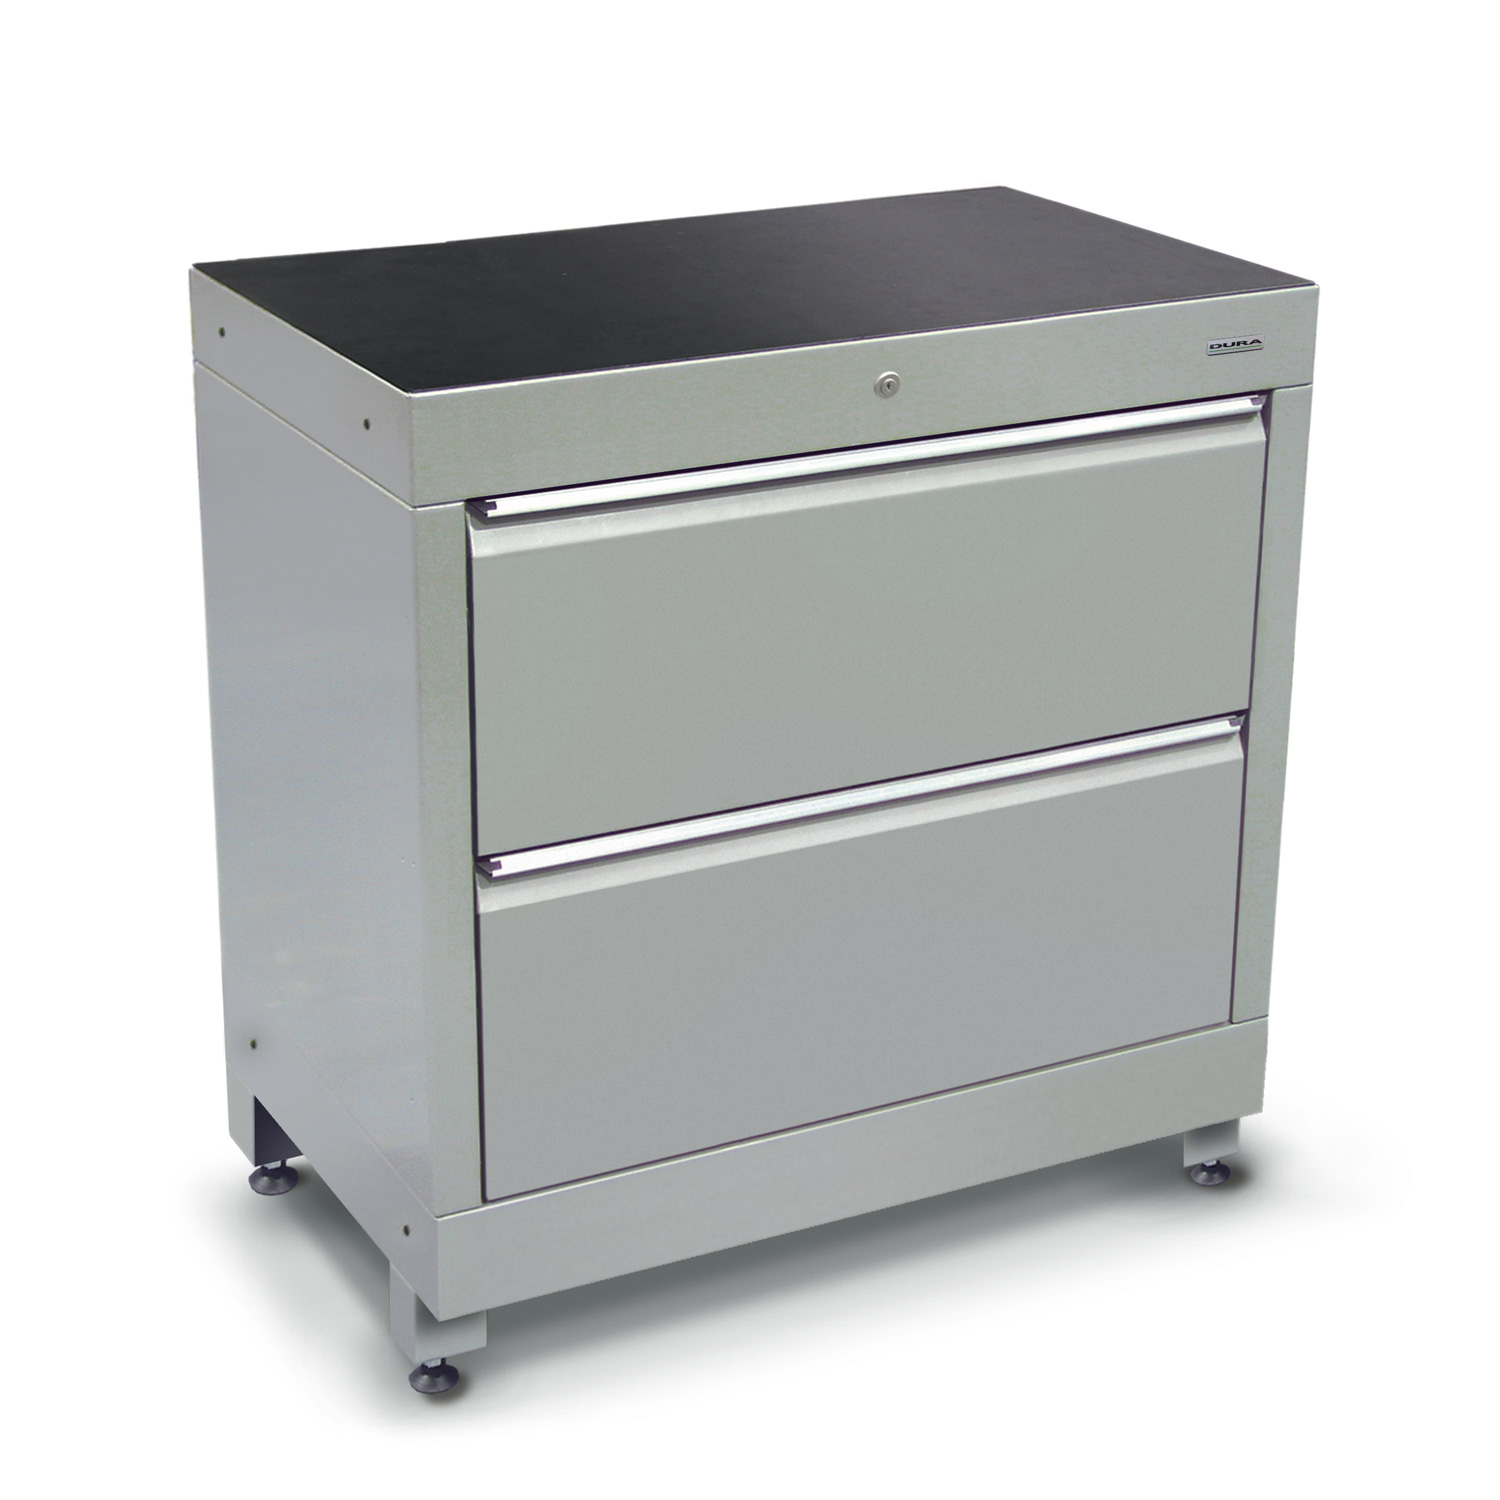 900mm tool storage cabinet with 2 extra deep drawers.